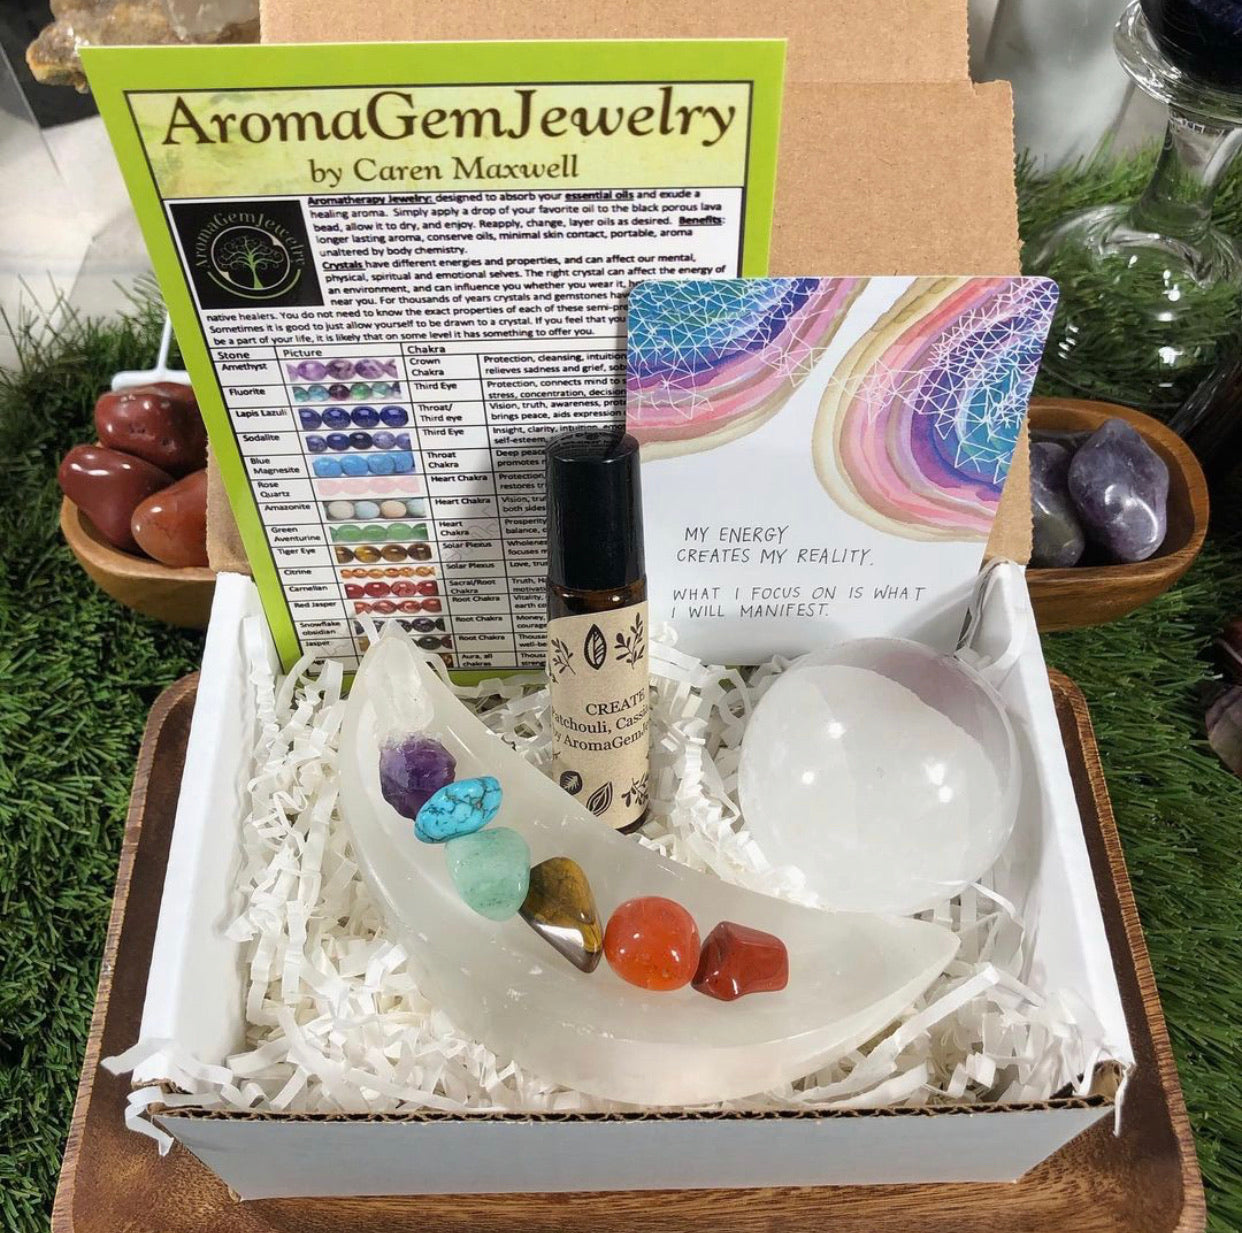 Affirmation Gift Set: “MY ENERGY CREATES MY REALITY. WHAT I FOCUS ON IS WHAT I WILL MANIFEST”